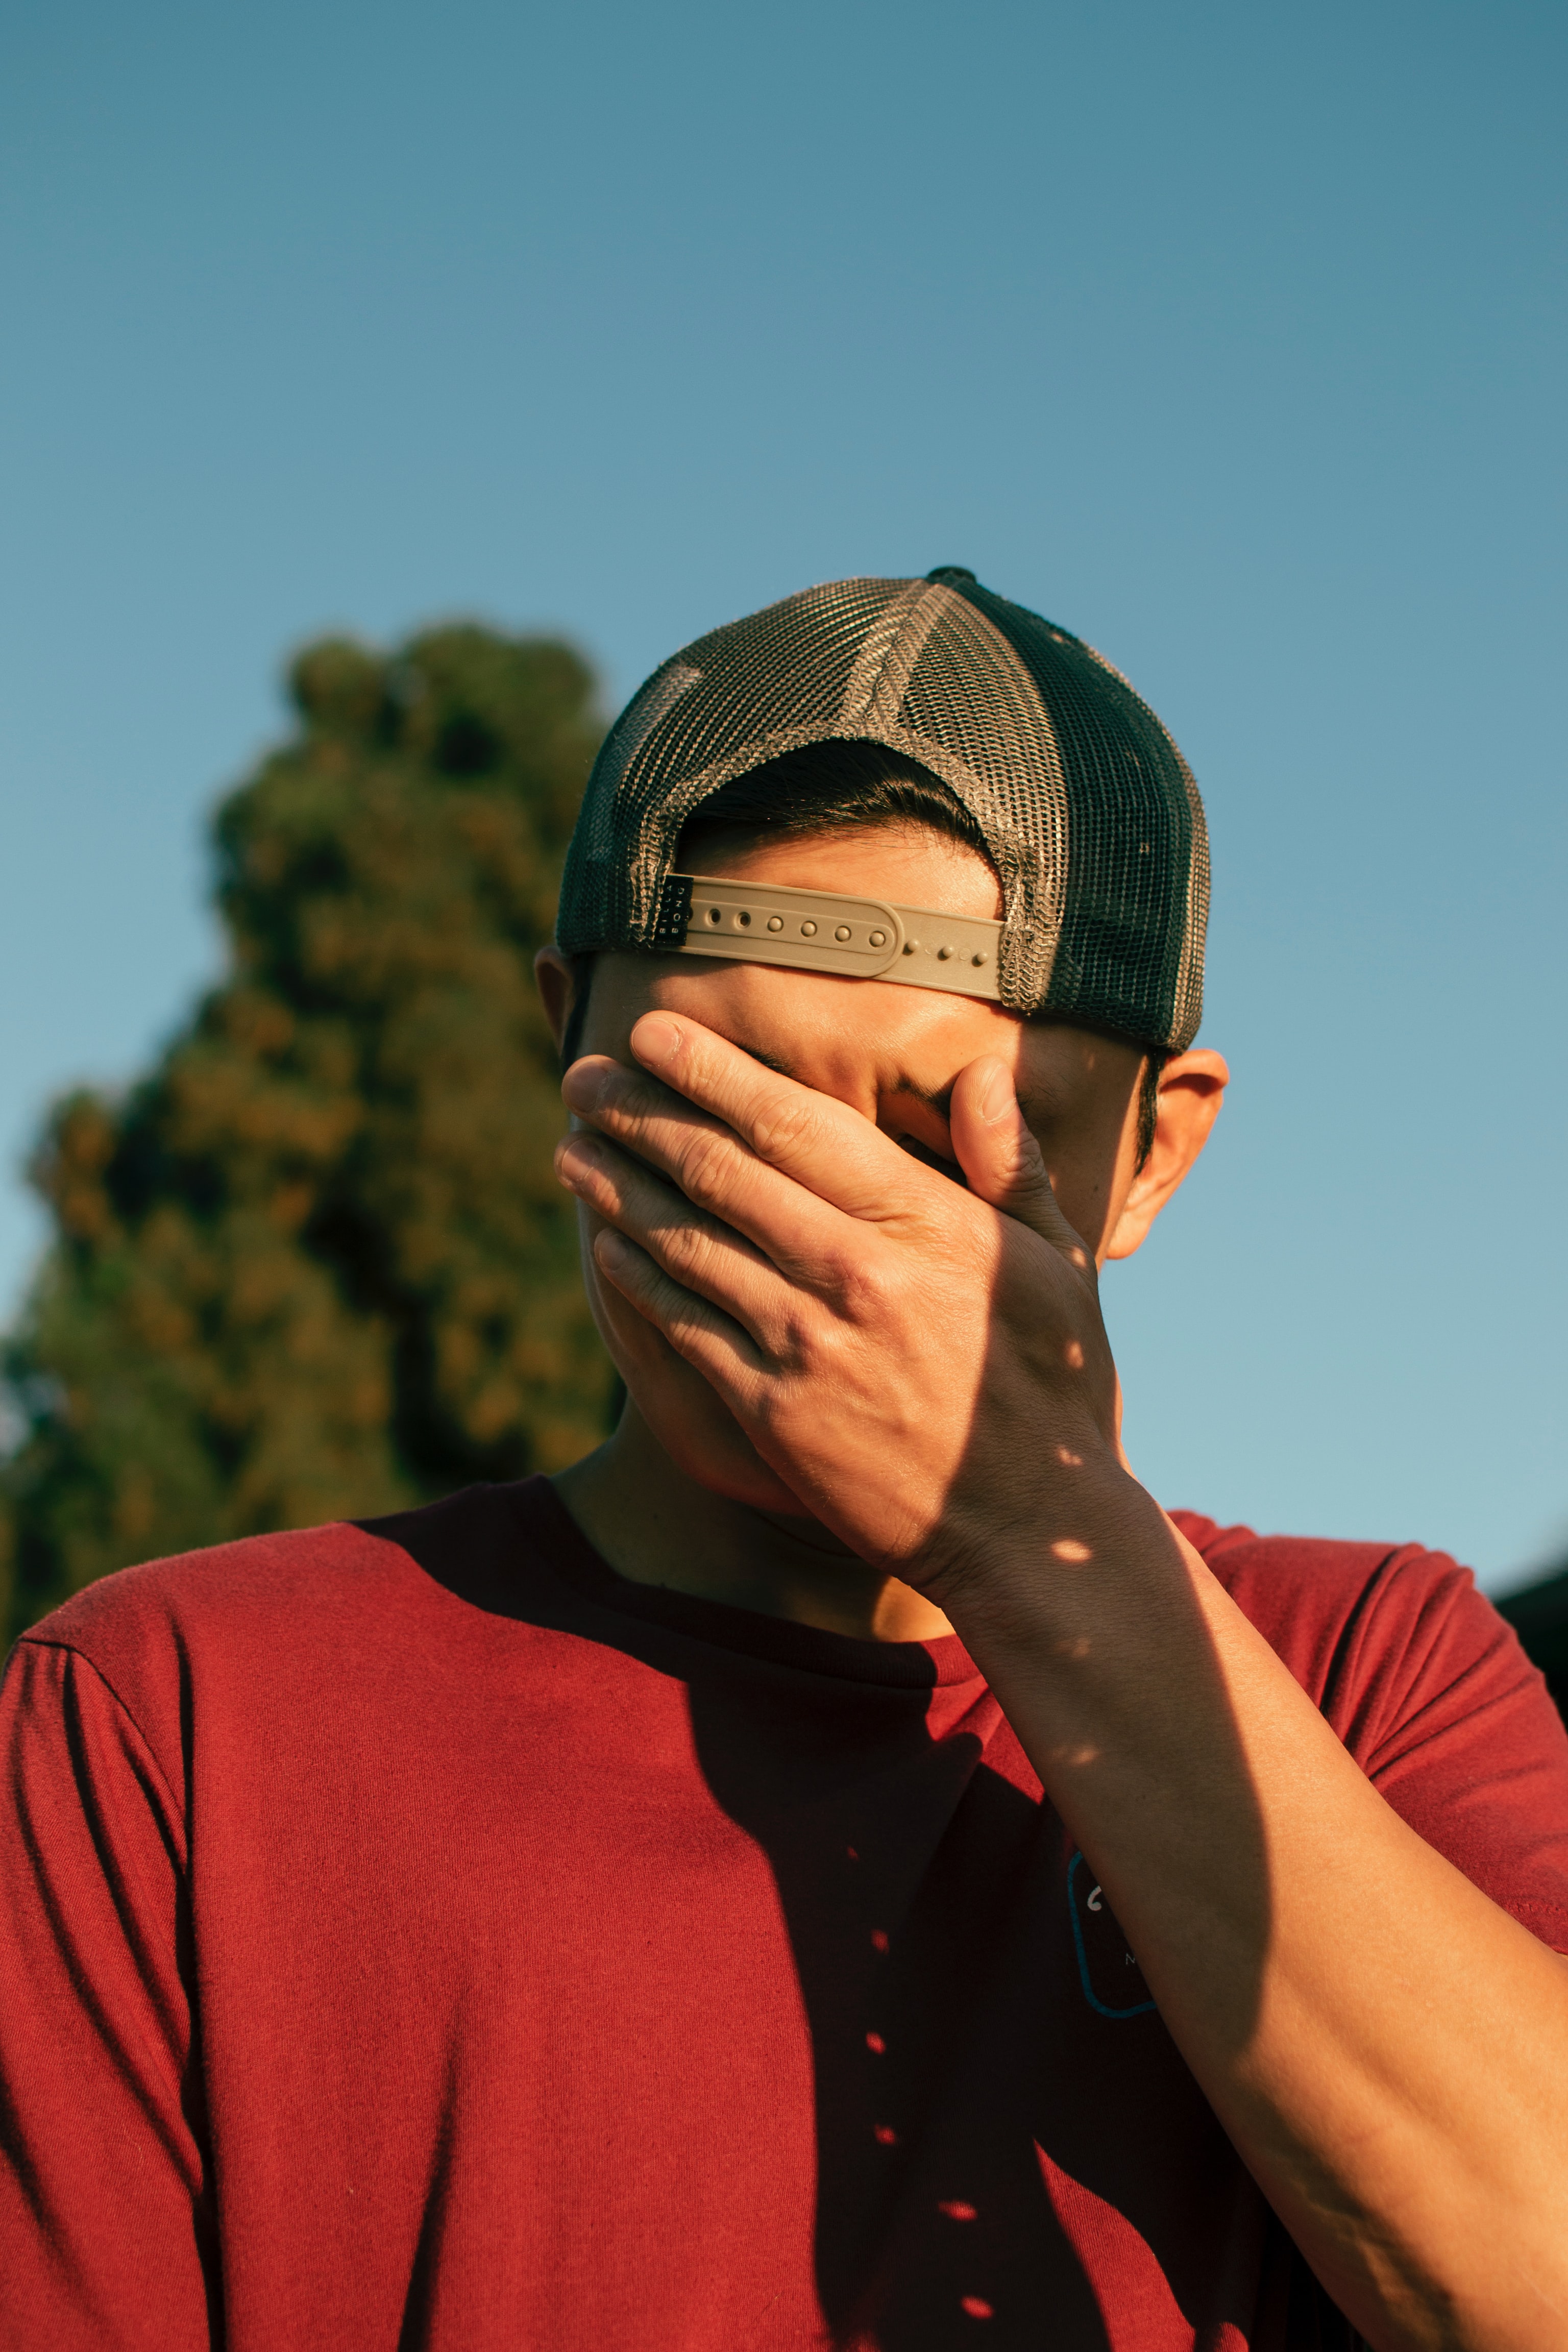 Man in backwards ball cap and maroon shirt with hand over his face; image by Chandra Oh, via Unsplash.com.